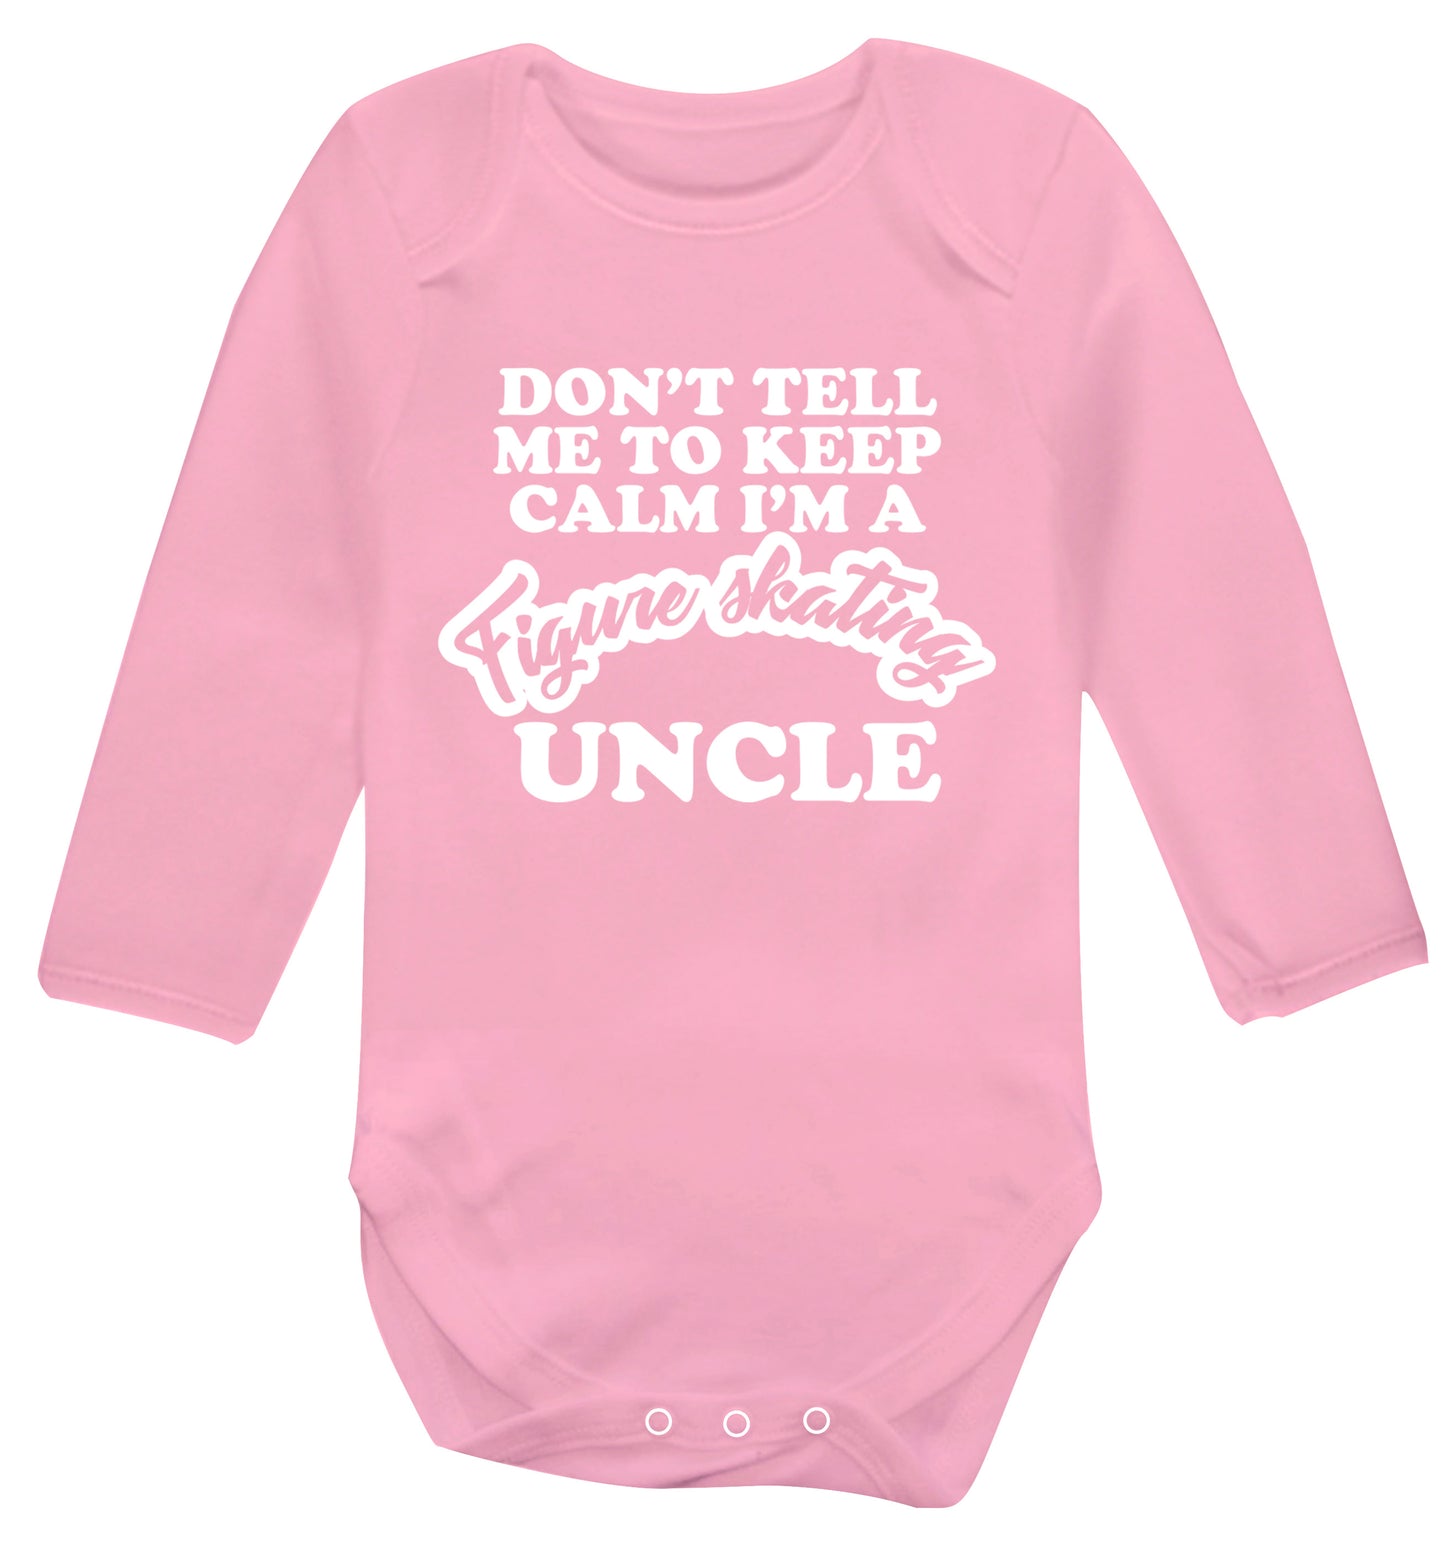 Don't tell me to keep calm I'm a figure skating uncle Baby Vest long sleeved pale pink 6-12 months